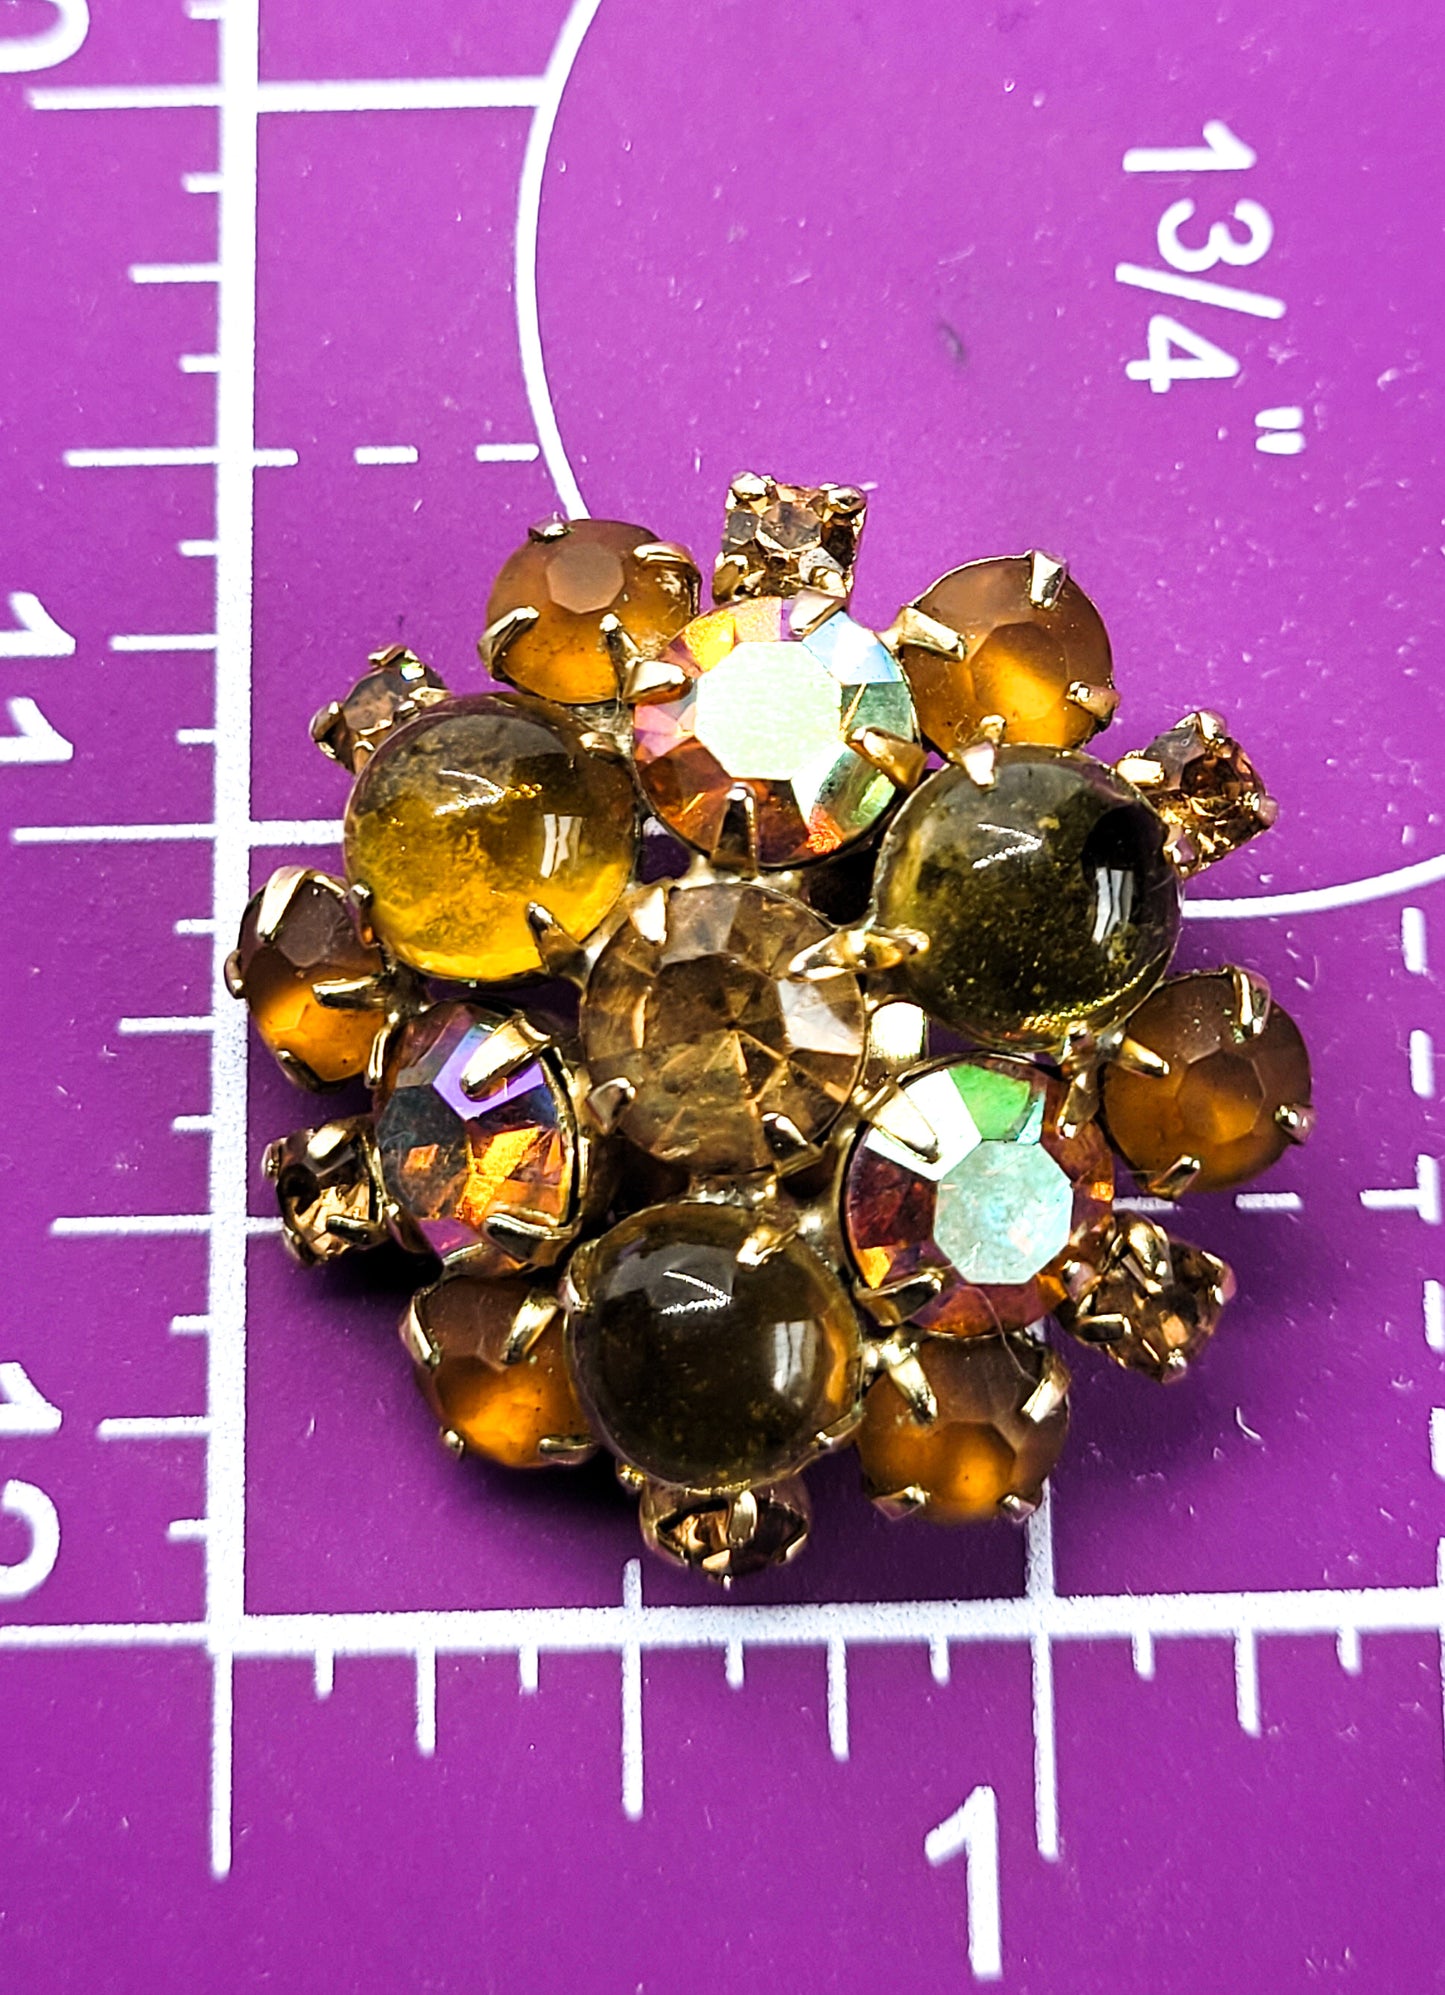 A Autumn Topaz amber Aurora Borealis Jelly belly frosted rhinestone earrings